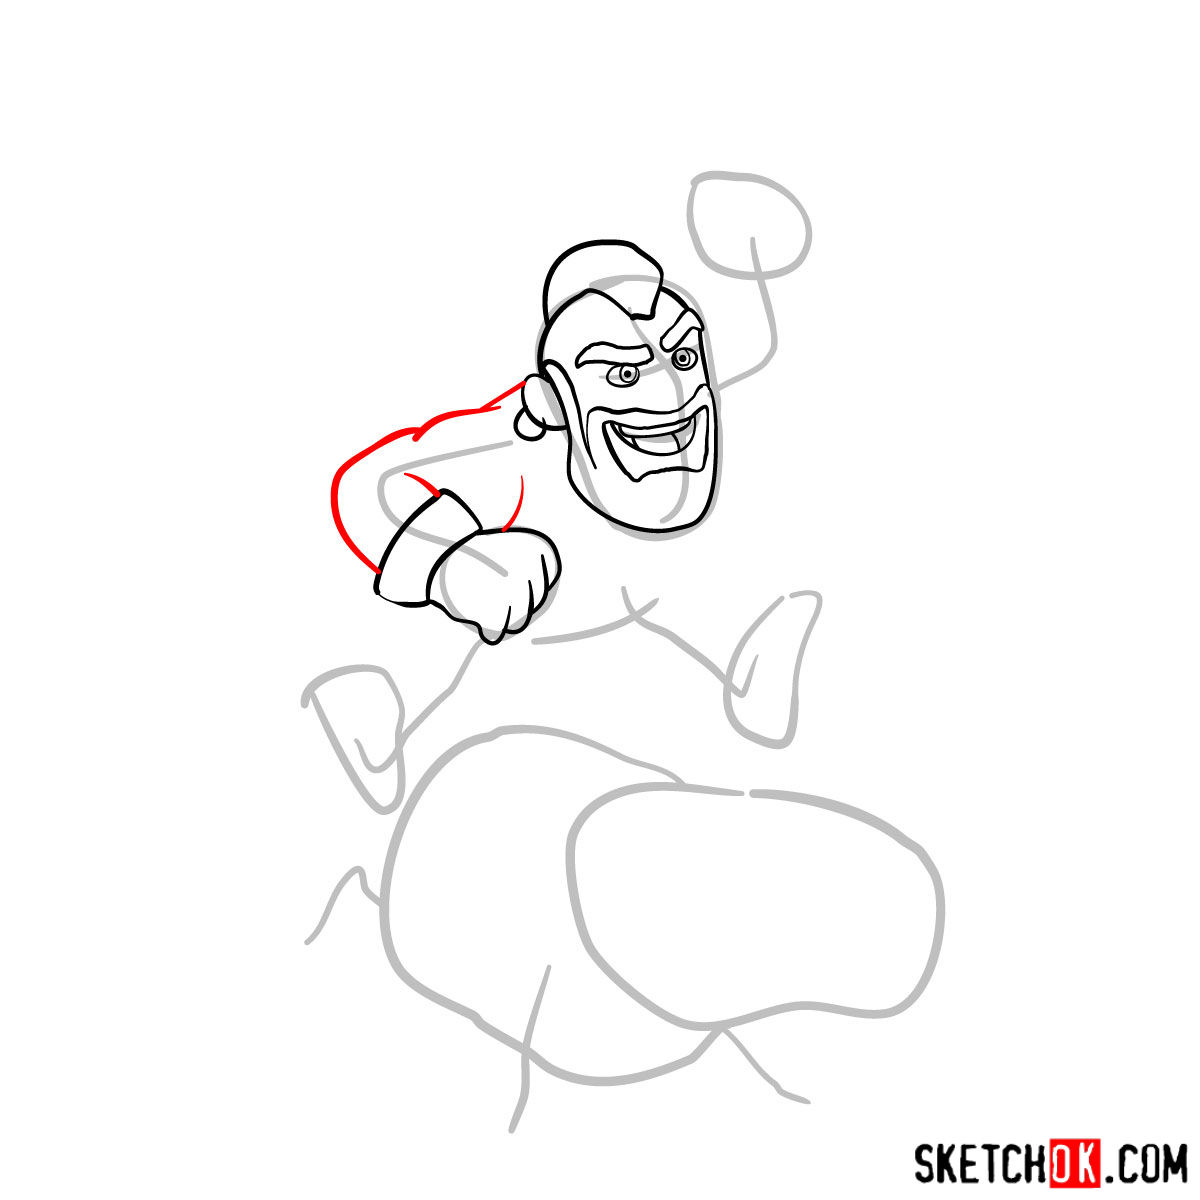 How to draw Hog Rider from Clash of Clans - step 05